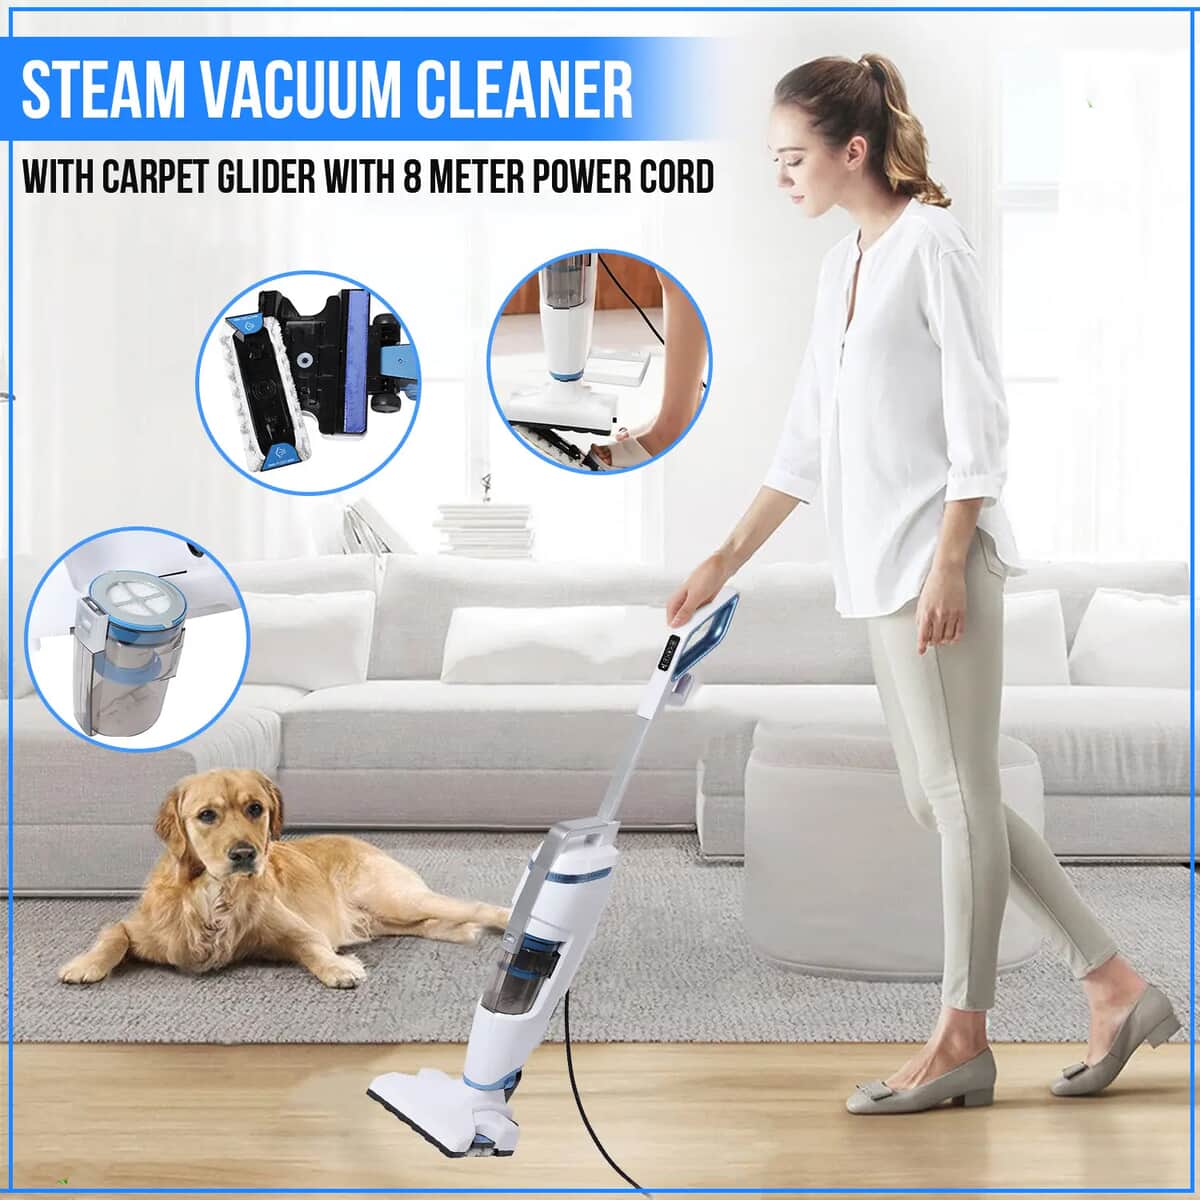 Steam Vacuum Cleaner with Carpet Glider, Multi Purpose Steam Cleaner For Home Kitchen Car Interior Uphoistery Cleaning, Vacuum Steamer image number 1